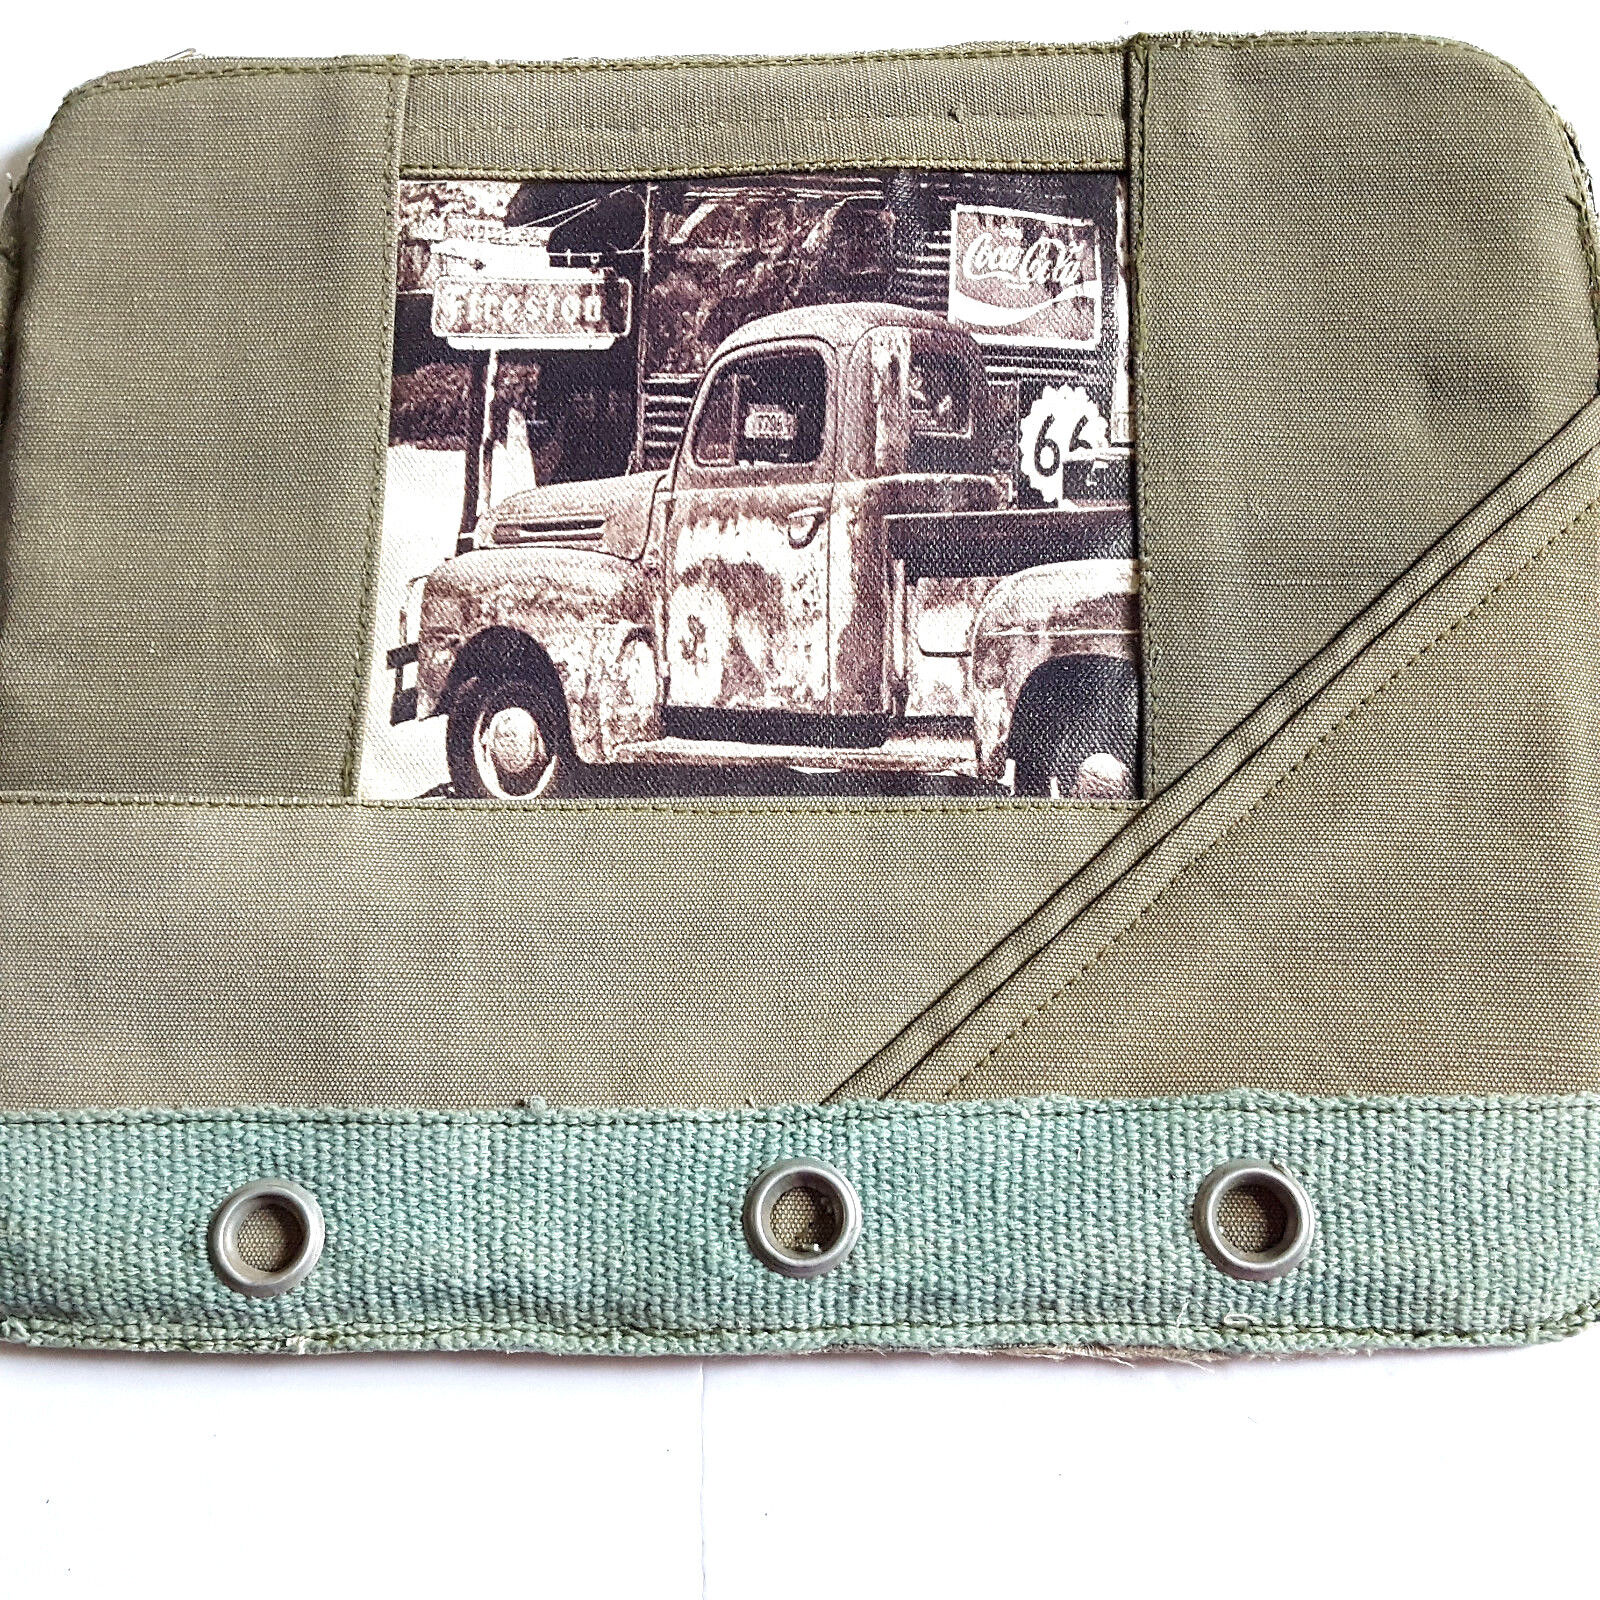 Antique Truck Laptop Tablet Sleeve Bag Recycled Canvas Vintage Addiction Case